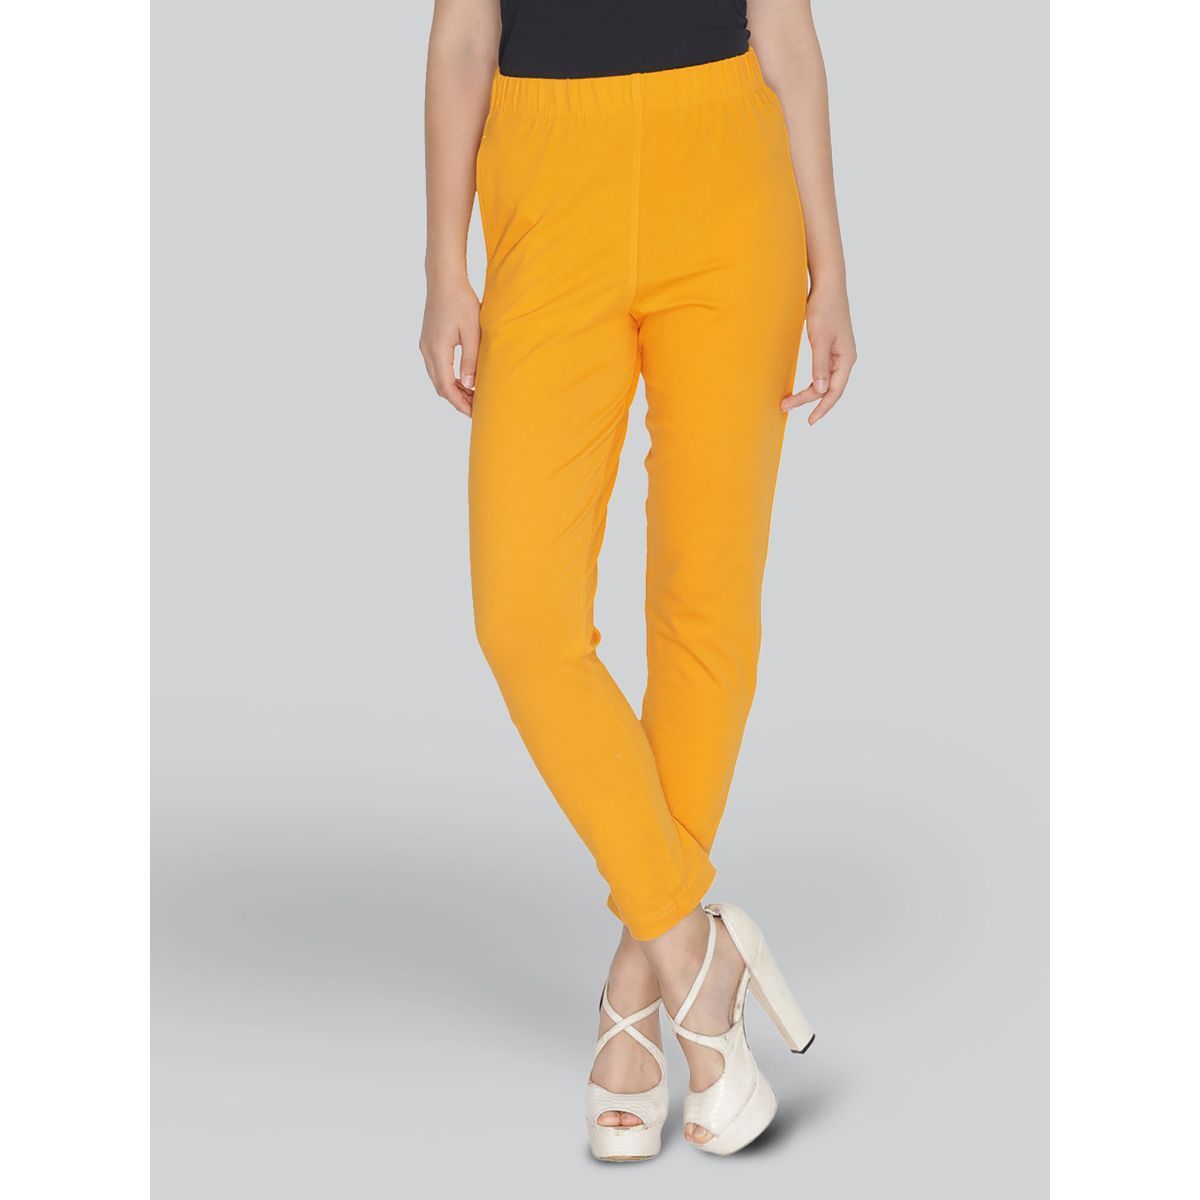 Textured Mustard Cotton Blend Pocket Bell Bottom Pant, Waist Size: 28.0 at  Rs 230/piece in New Delhi